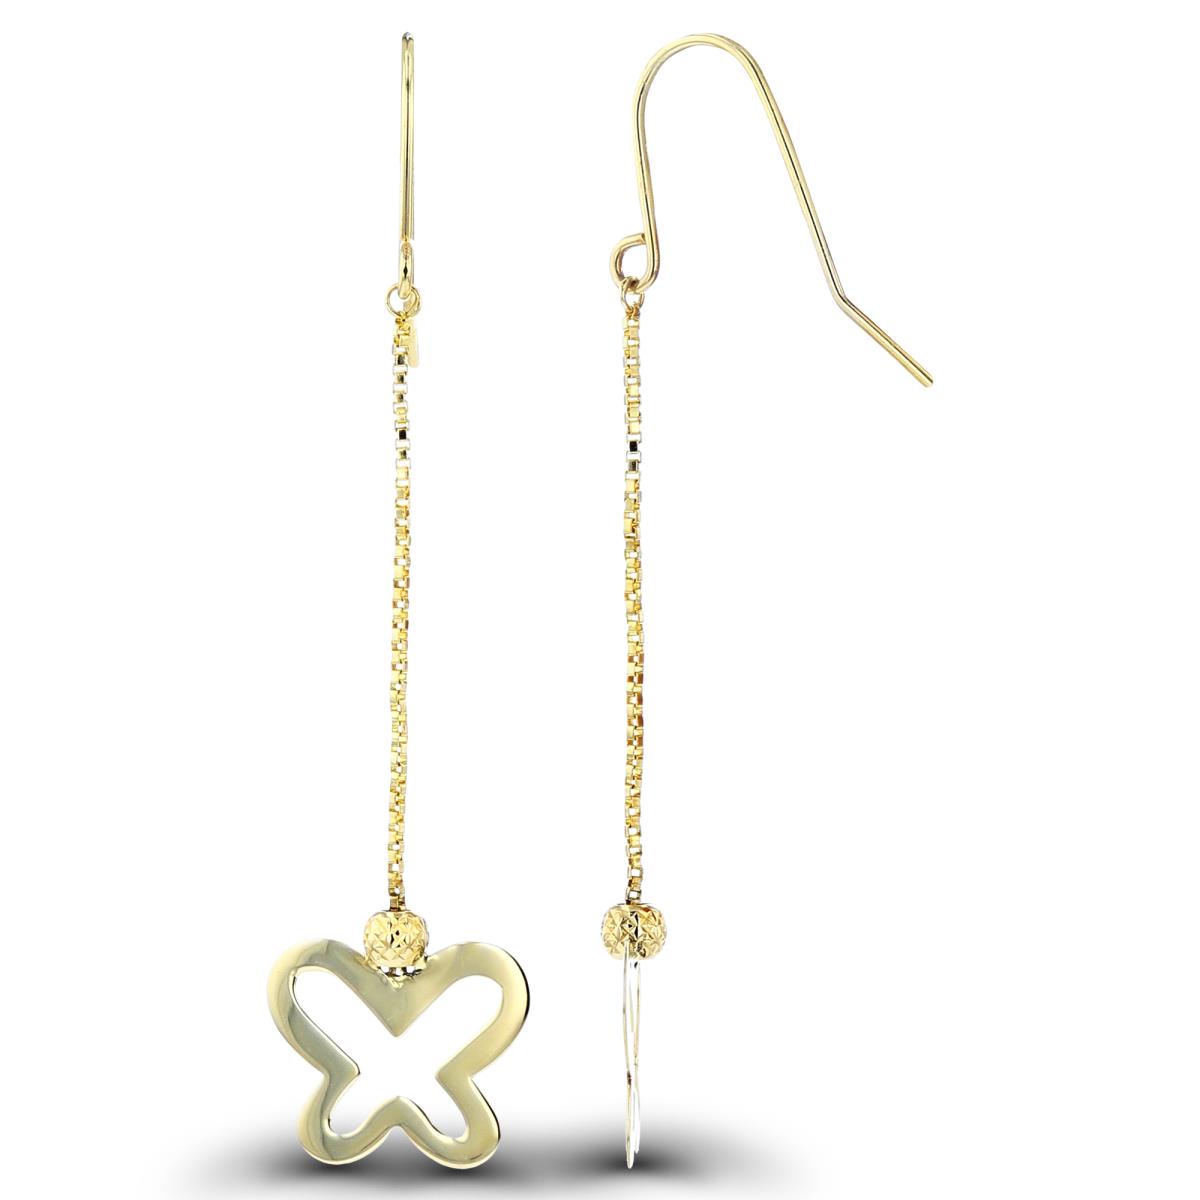 14K Yellow Gold High Polish Butterfly & DC Ball Dangling on Spool Earrings with Fish Hook